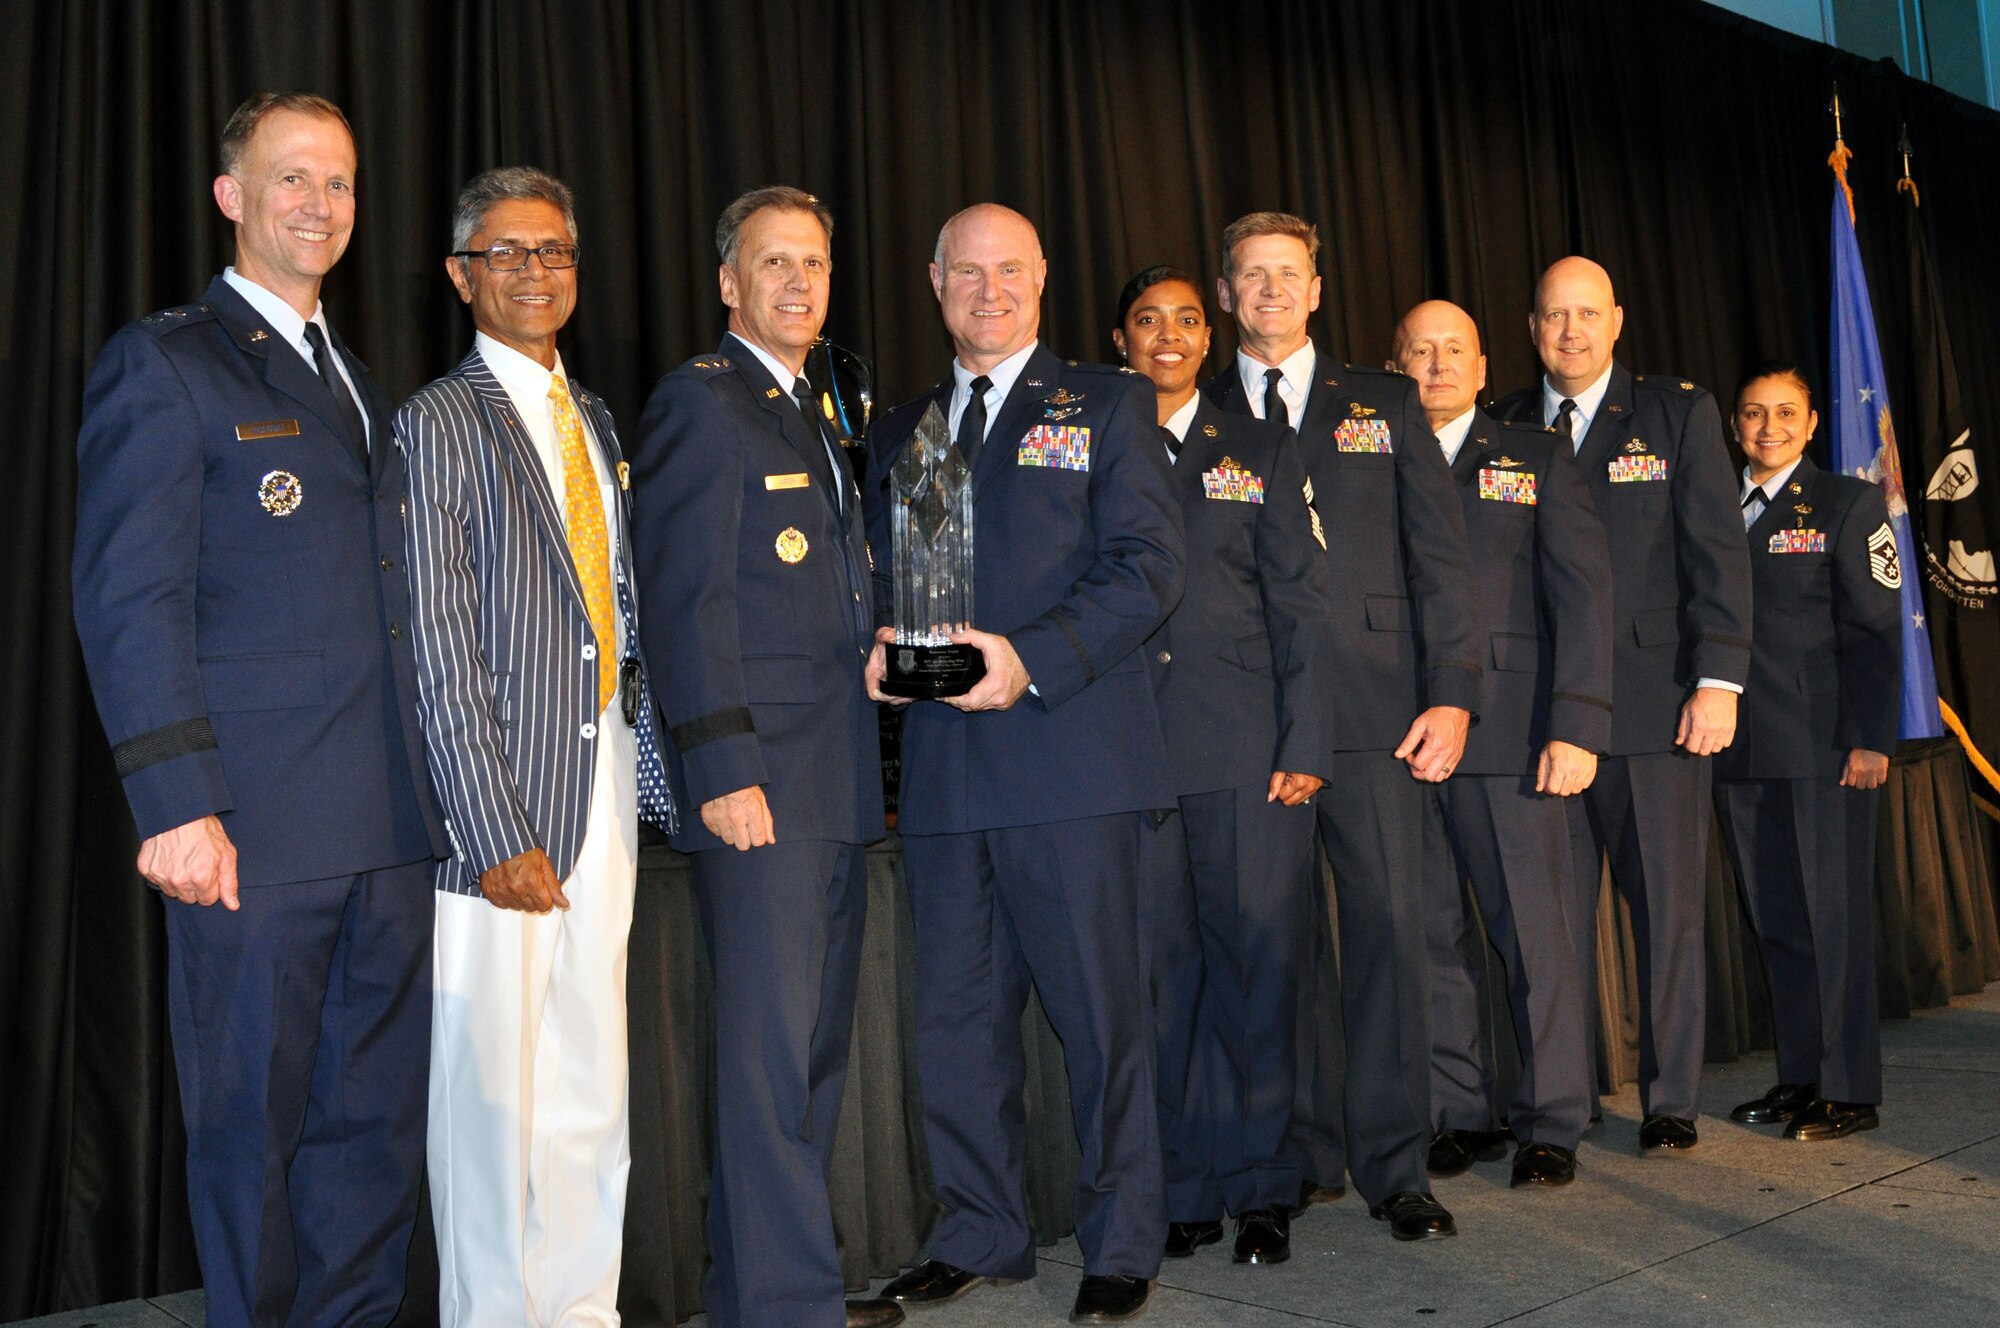 Members from the 507th Air Refueling Wing, Tinker Air Force Base, Okla., accept the 2019 Raincross Trophy, and the title of "Best of the Best in Fourth Air Force," during the 20th Annual Raincross Awards dinner Nov. 19, 2019 at the Riverside Convention Center, Riverside, California. (U.S. Air Force photo by Candy Knight)